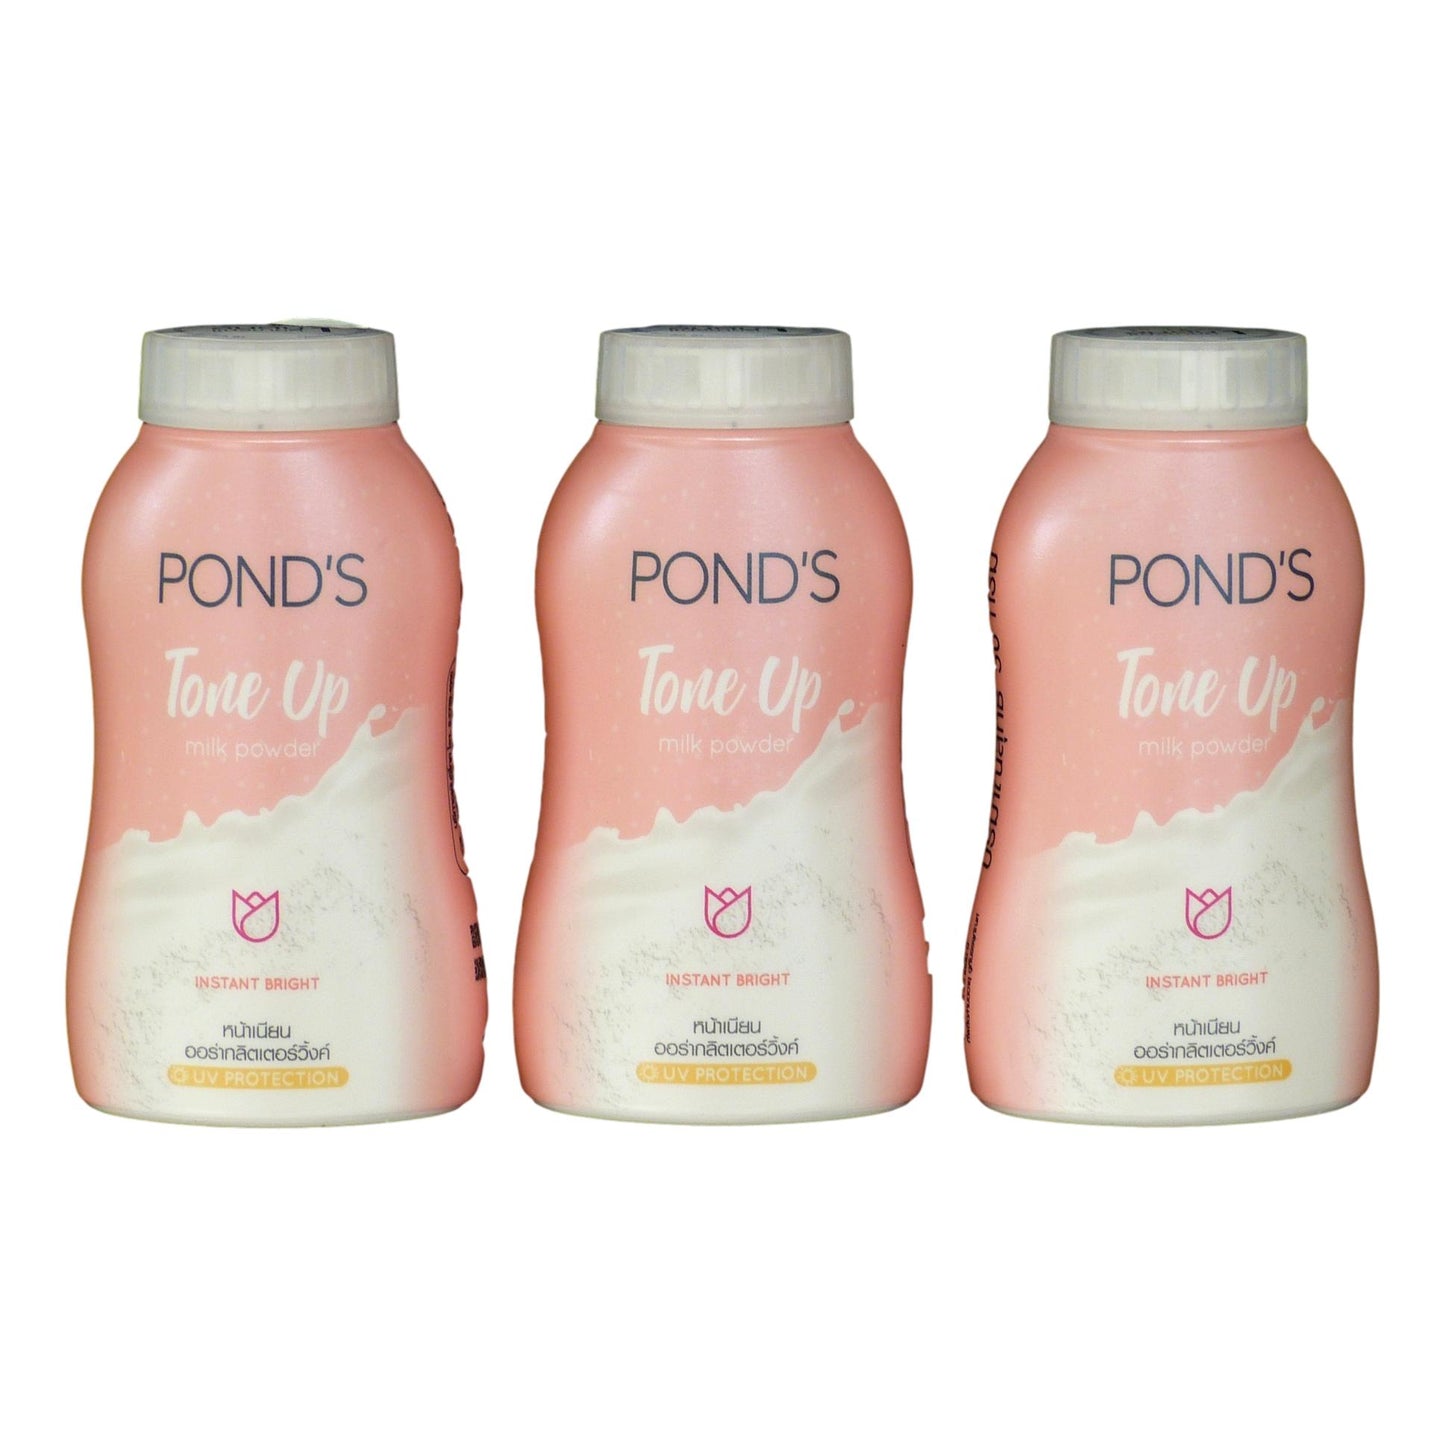 Pond's Tone Up Milk Powder Instant Bright 50g Pack of 3 - Asian Beauty Supply